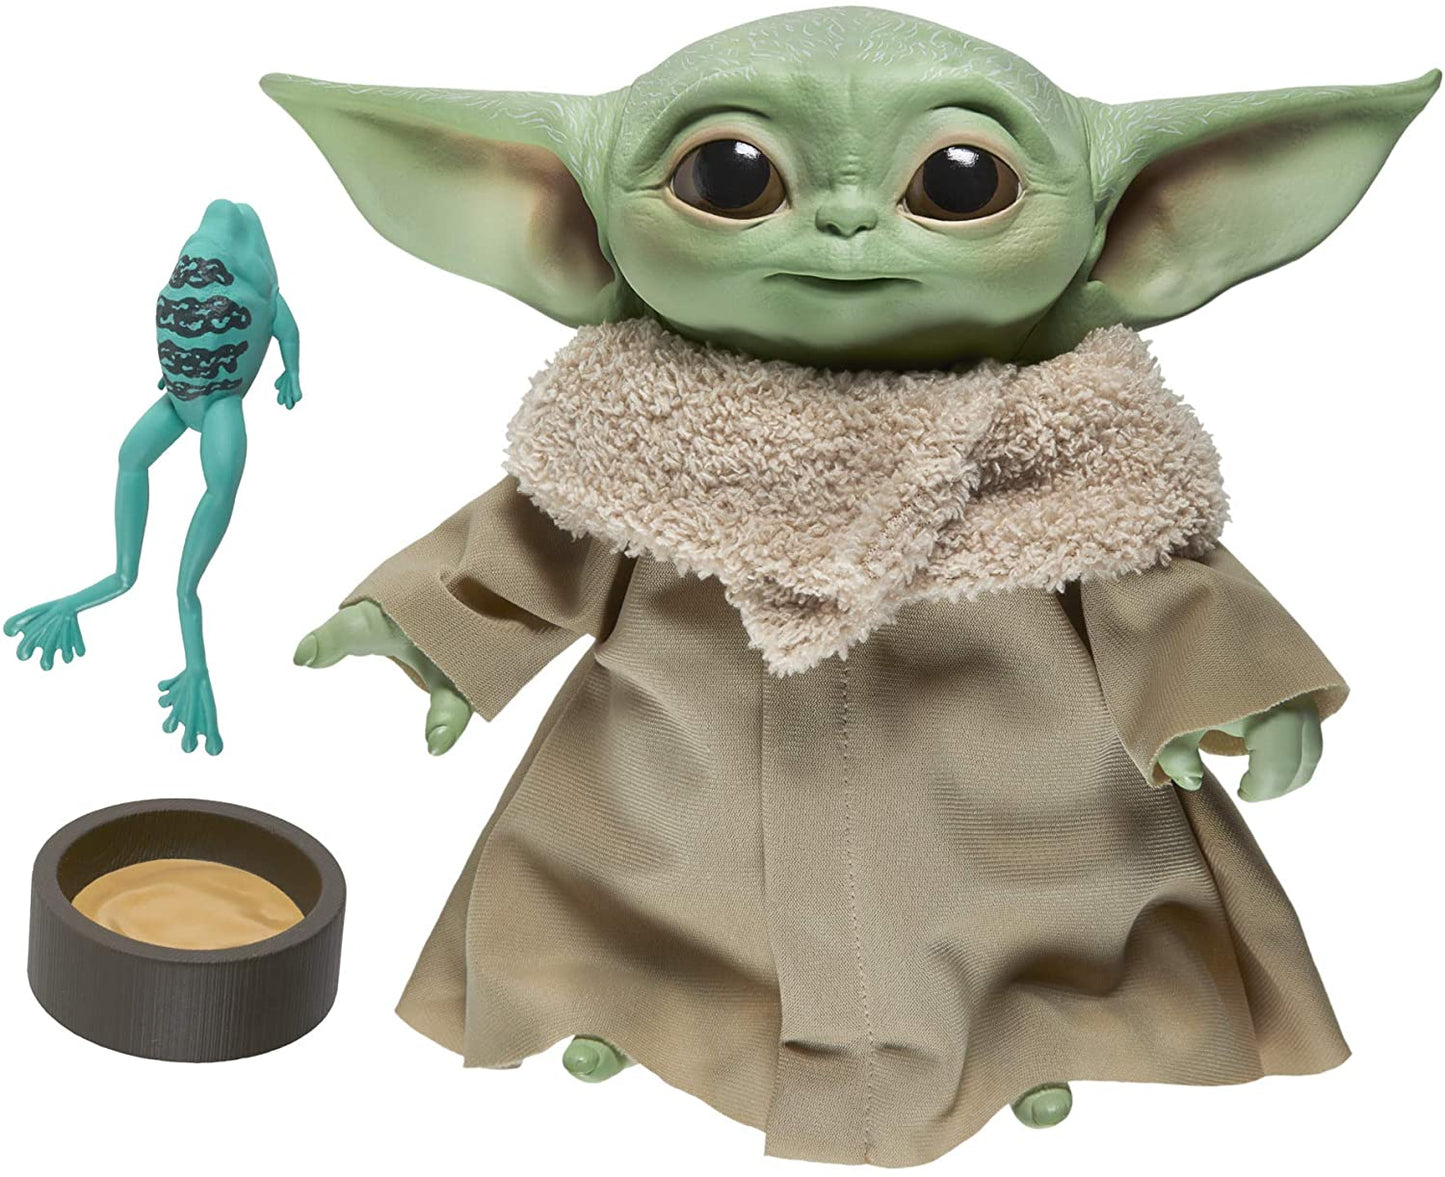 Star Wars The Child Talking Plush Toy With Character Sounds And Accessories - Toy - The Hooded Goblin